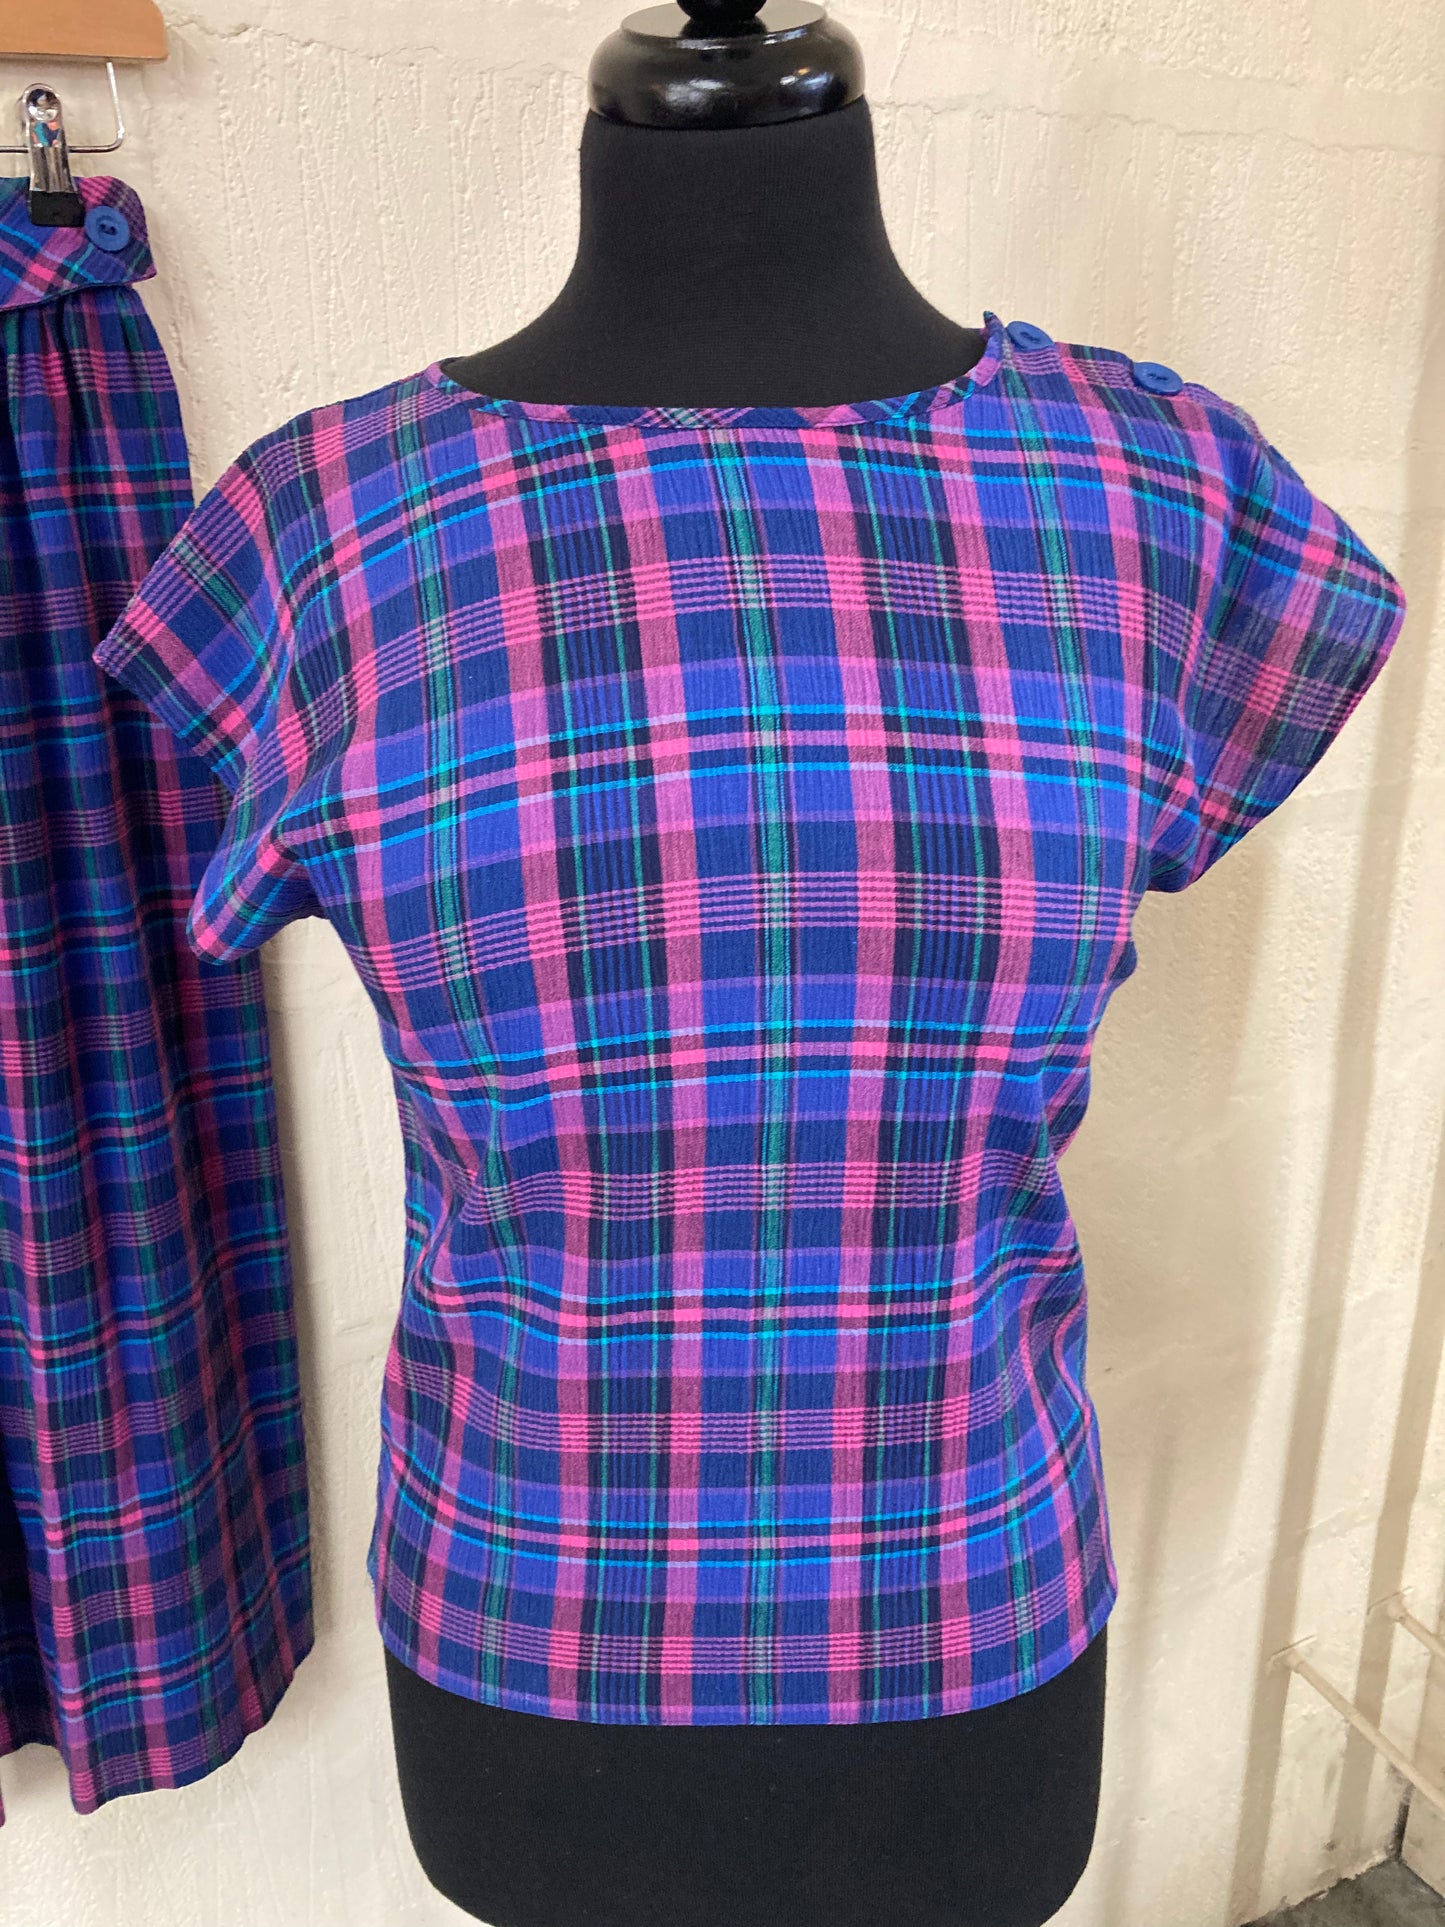 Vintage BHS Cap Sleeve Blue, Pink and Green Plaid Top Size 8